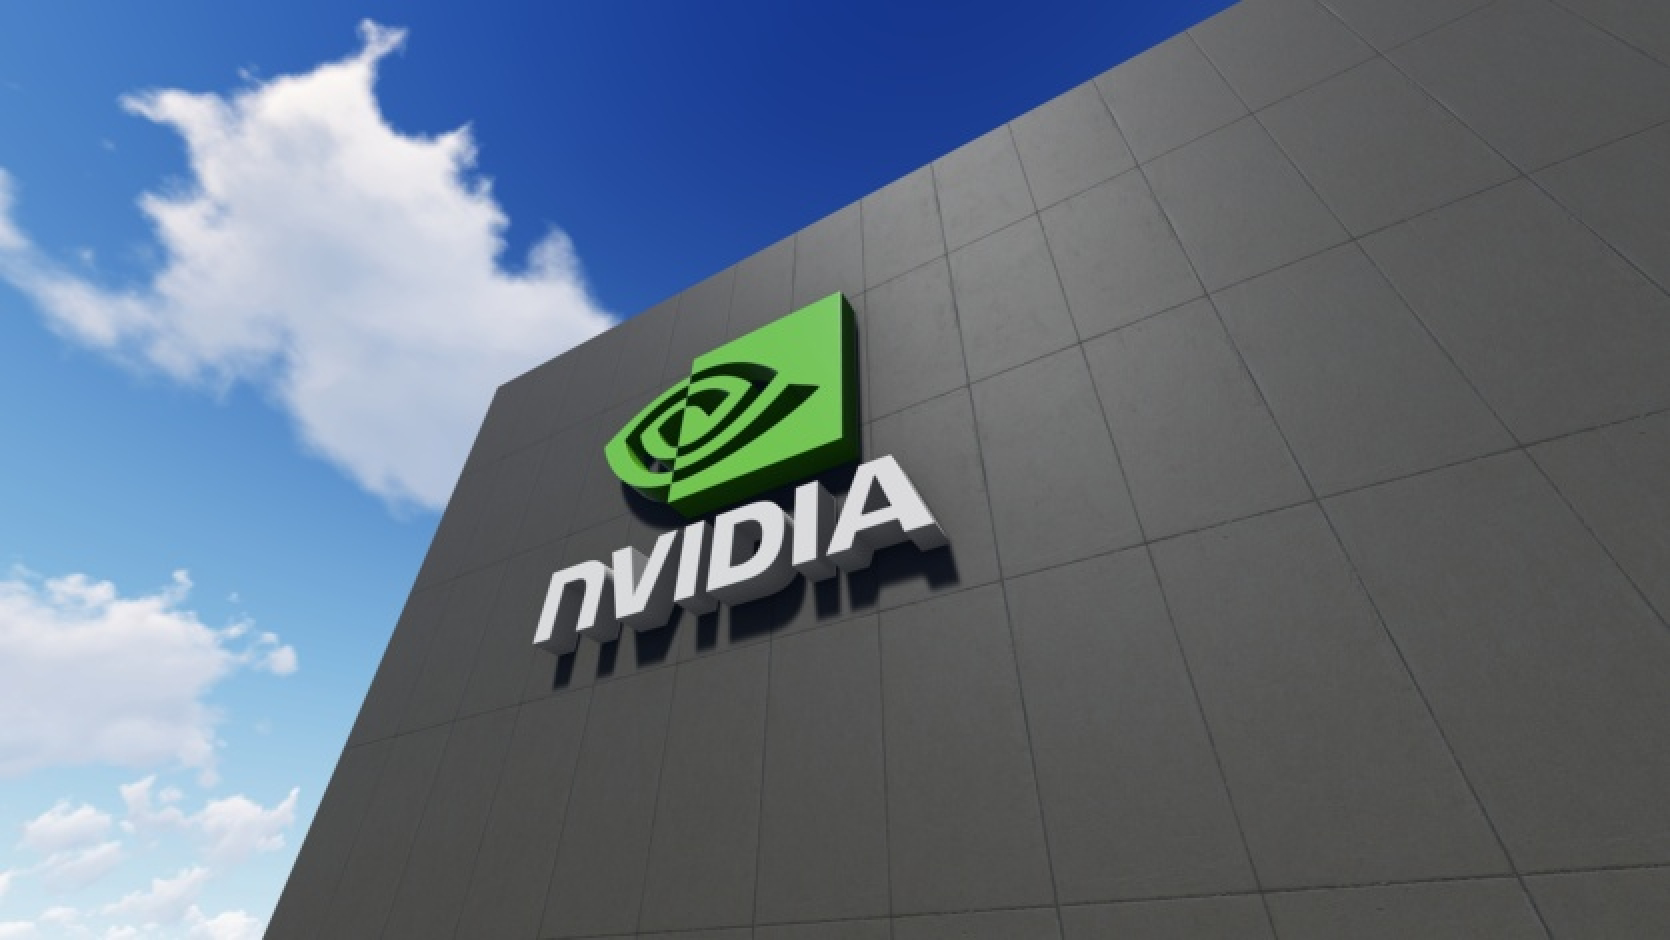 New NVIDIA graphics cards every year: announced a shift to an annual development cycle amid 262% quarter-over-quarter revenue growth ($26 billion)